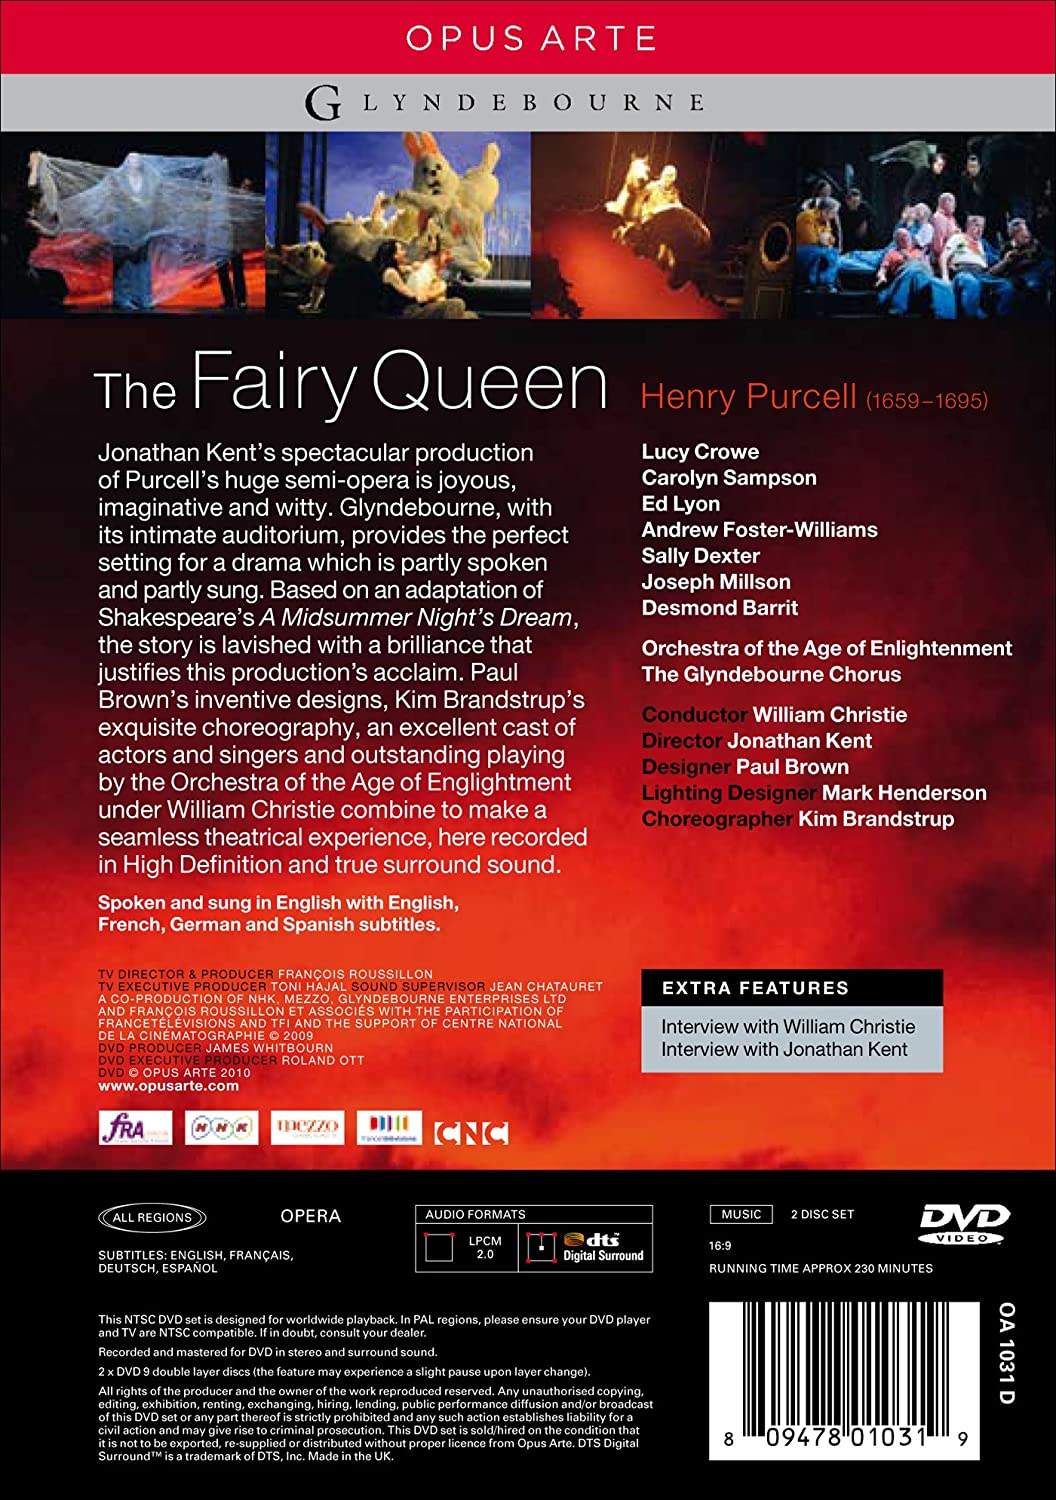 Purcell: The Fairy Queen - slide-1